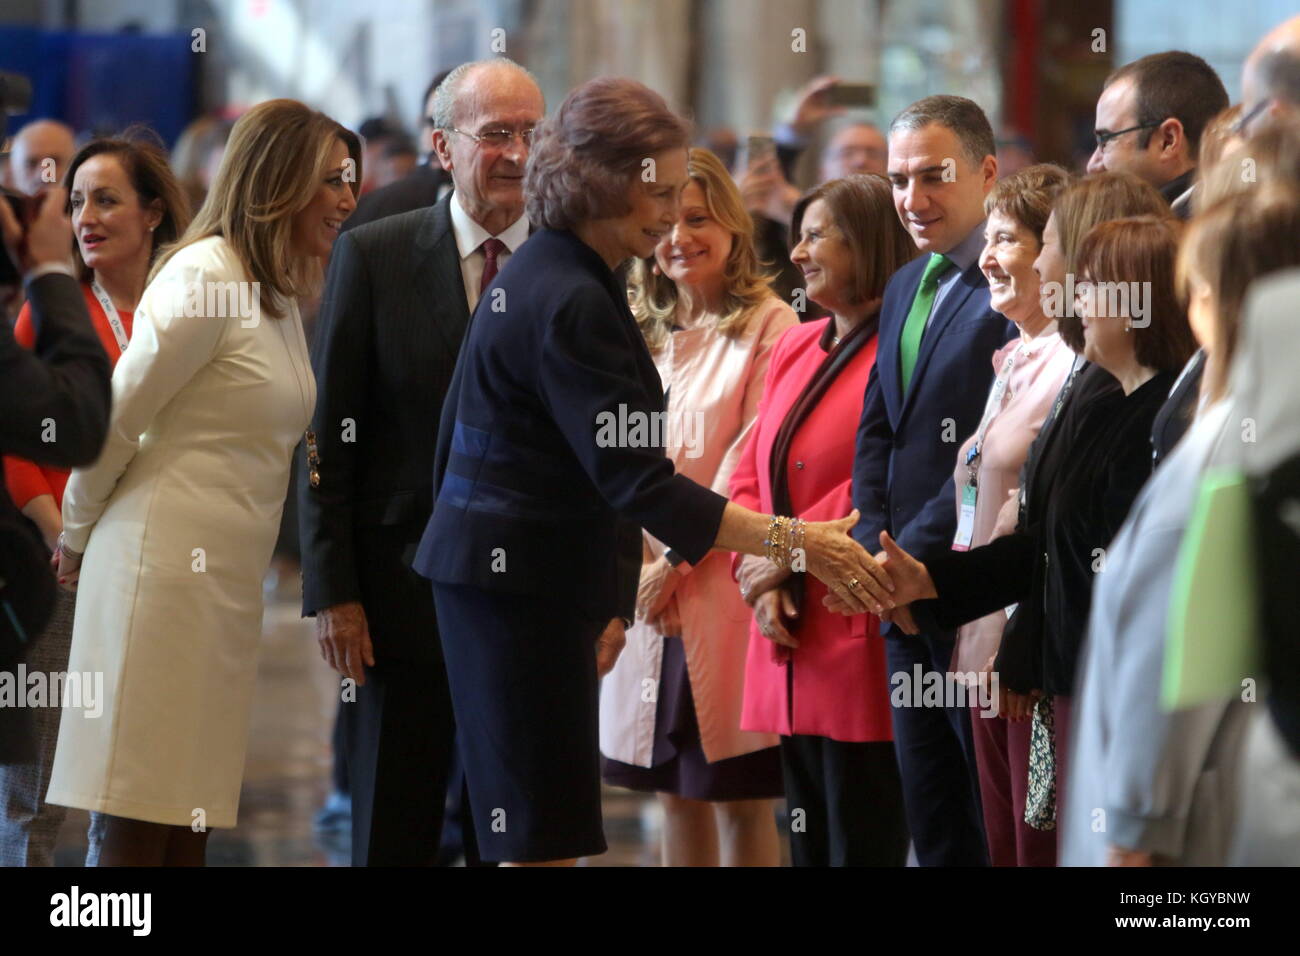 November 10, 2017 - 10 November (Malaga) Queen Sofia has opened this Friday the VII National Congress of Alzheimer, which is held at the Palace of Congresses and Fairs of Malaga with the assistance of family members, professionals and some patients. DoÃ±a SofÃa was accompanied at the opening ceremony by the president of the Junta de AndalucÃa, Susana DÃaz; the mayor of MÃ¡laga, Francisco de la Torre; the Secretary of State for Social Services and Equality, Mario GarcÃ©s, and the president of the Spanish Confederation of Alzheimer's (CEAFA), Cheles Cantabrana, organizing entity of the congre Stock Photo